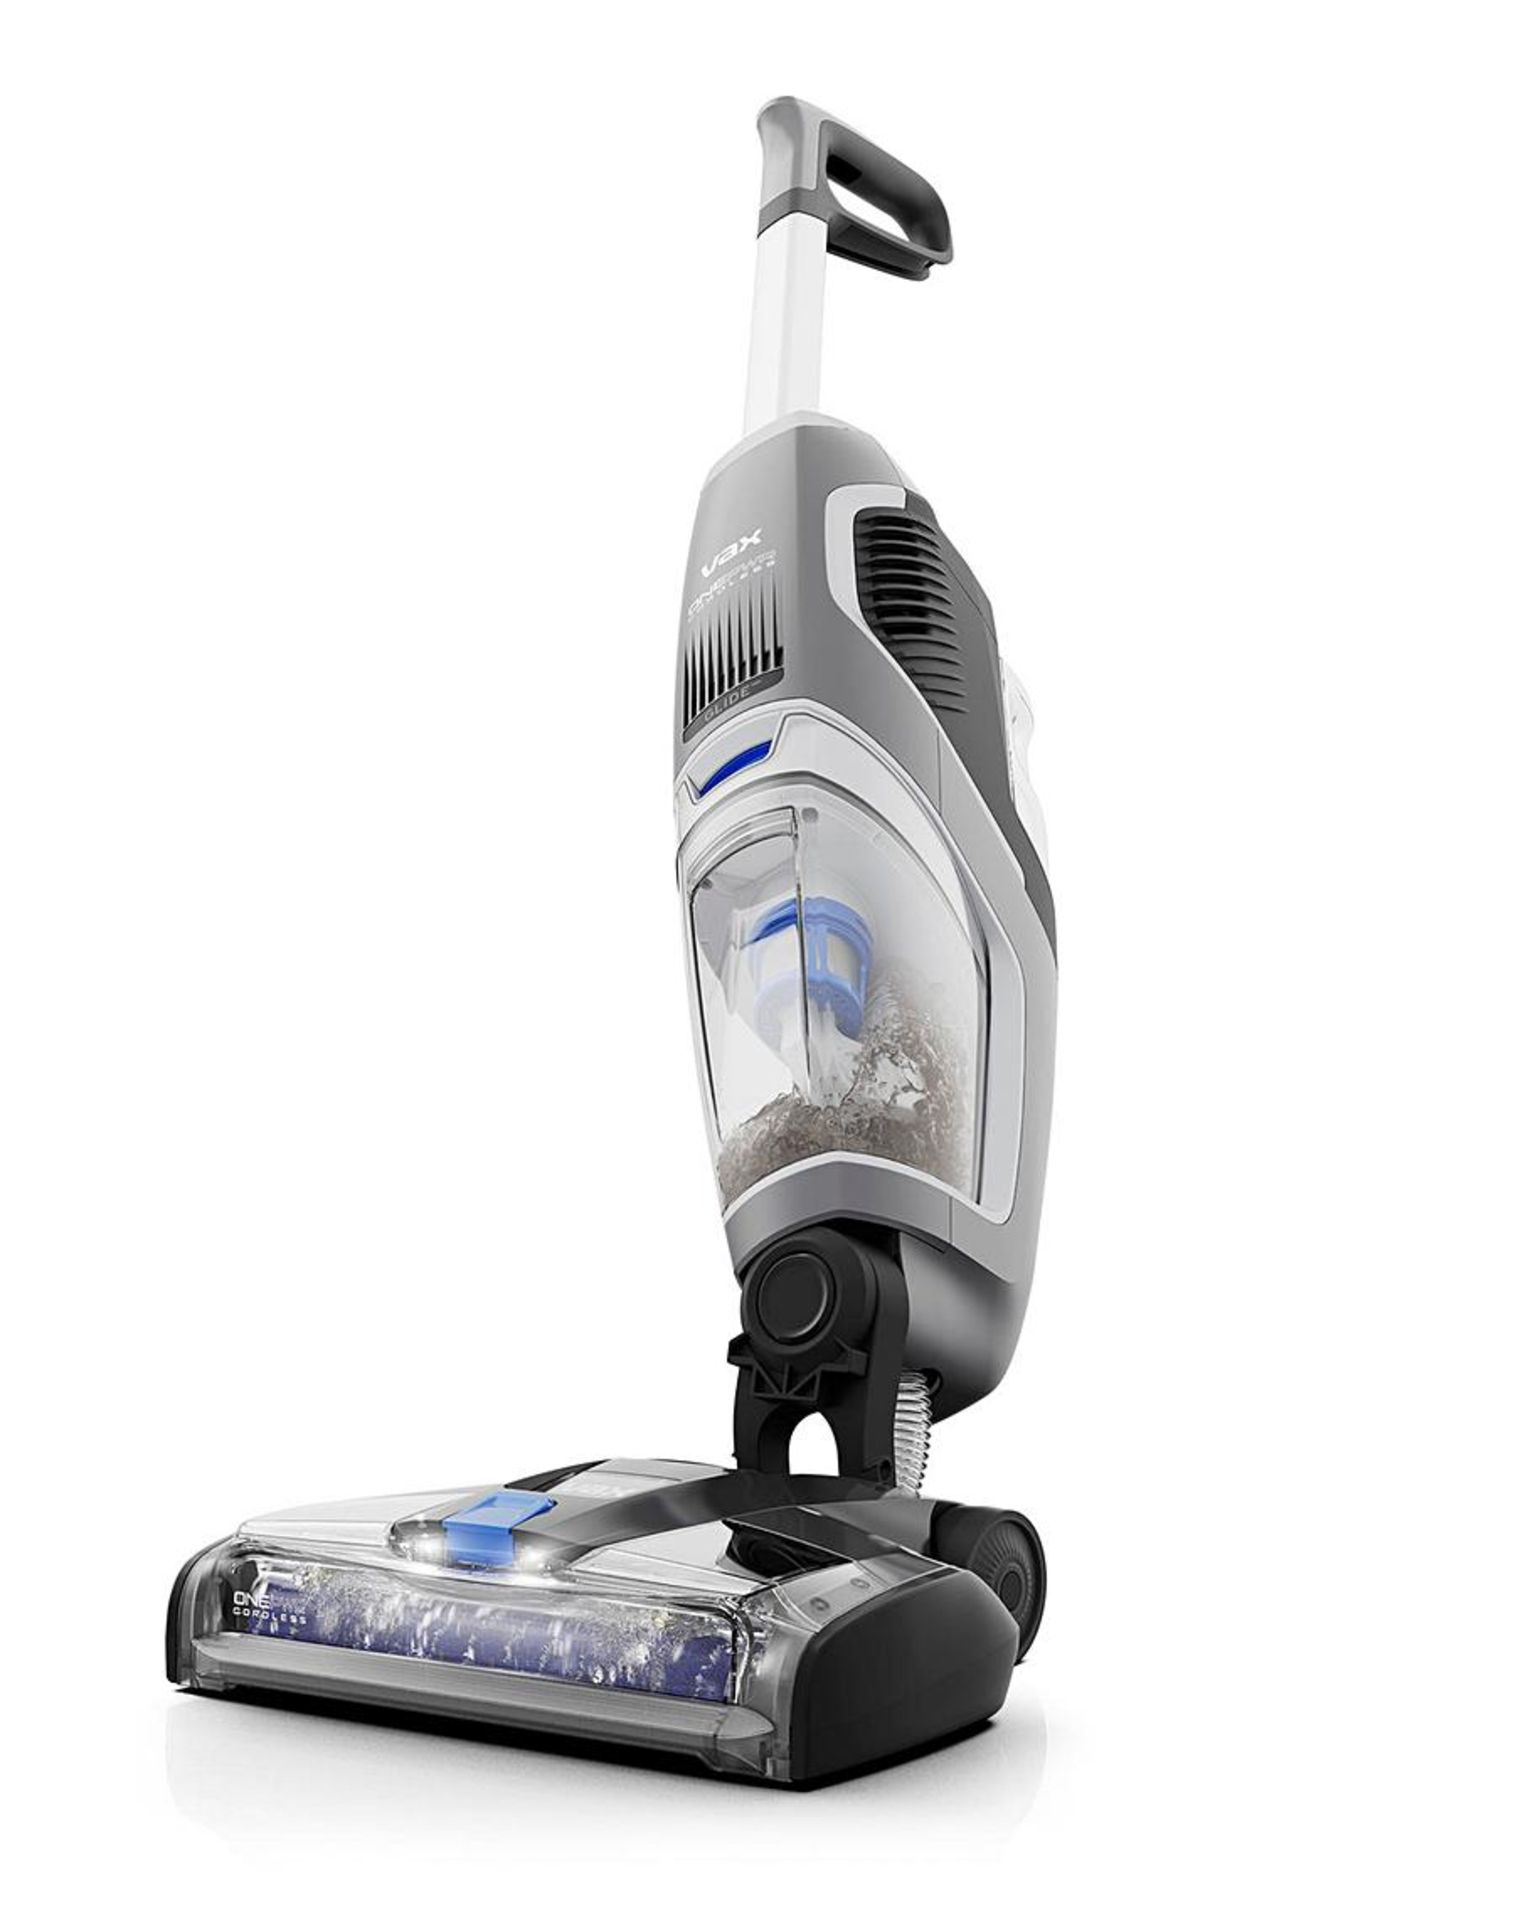 Vax ONEPWR Glide Wet and Dry Hard Floor Cleaner. - SR5. RRP £299.99. The lightweight Vax OnePwr